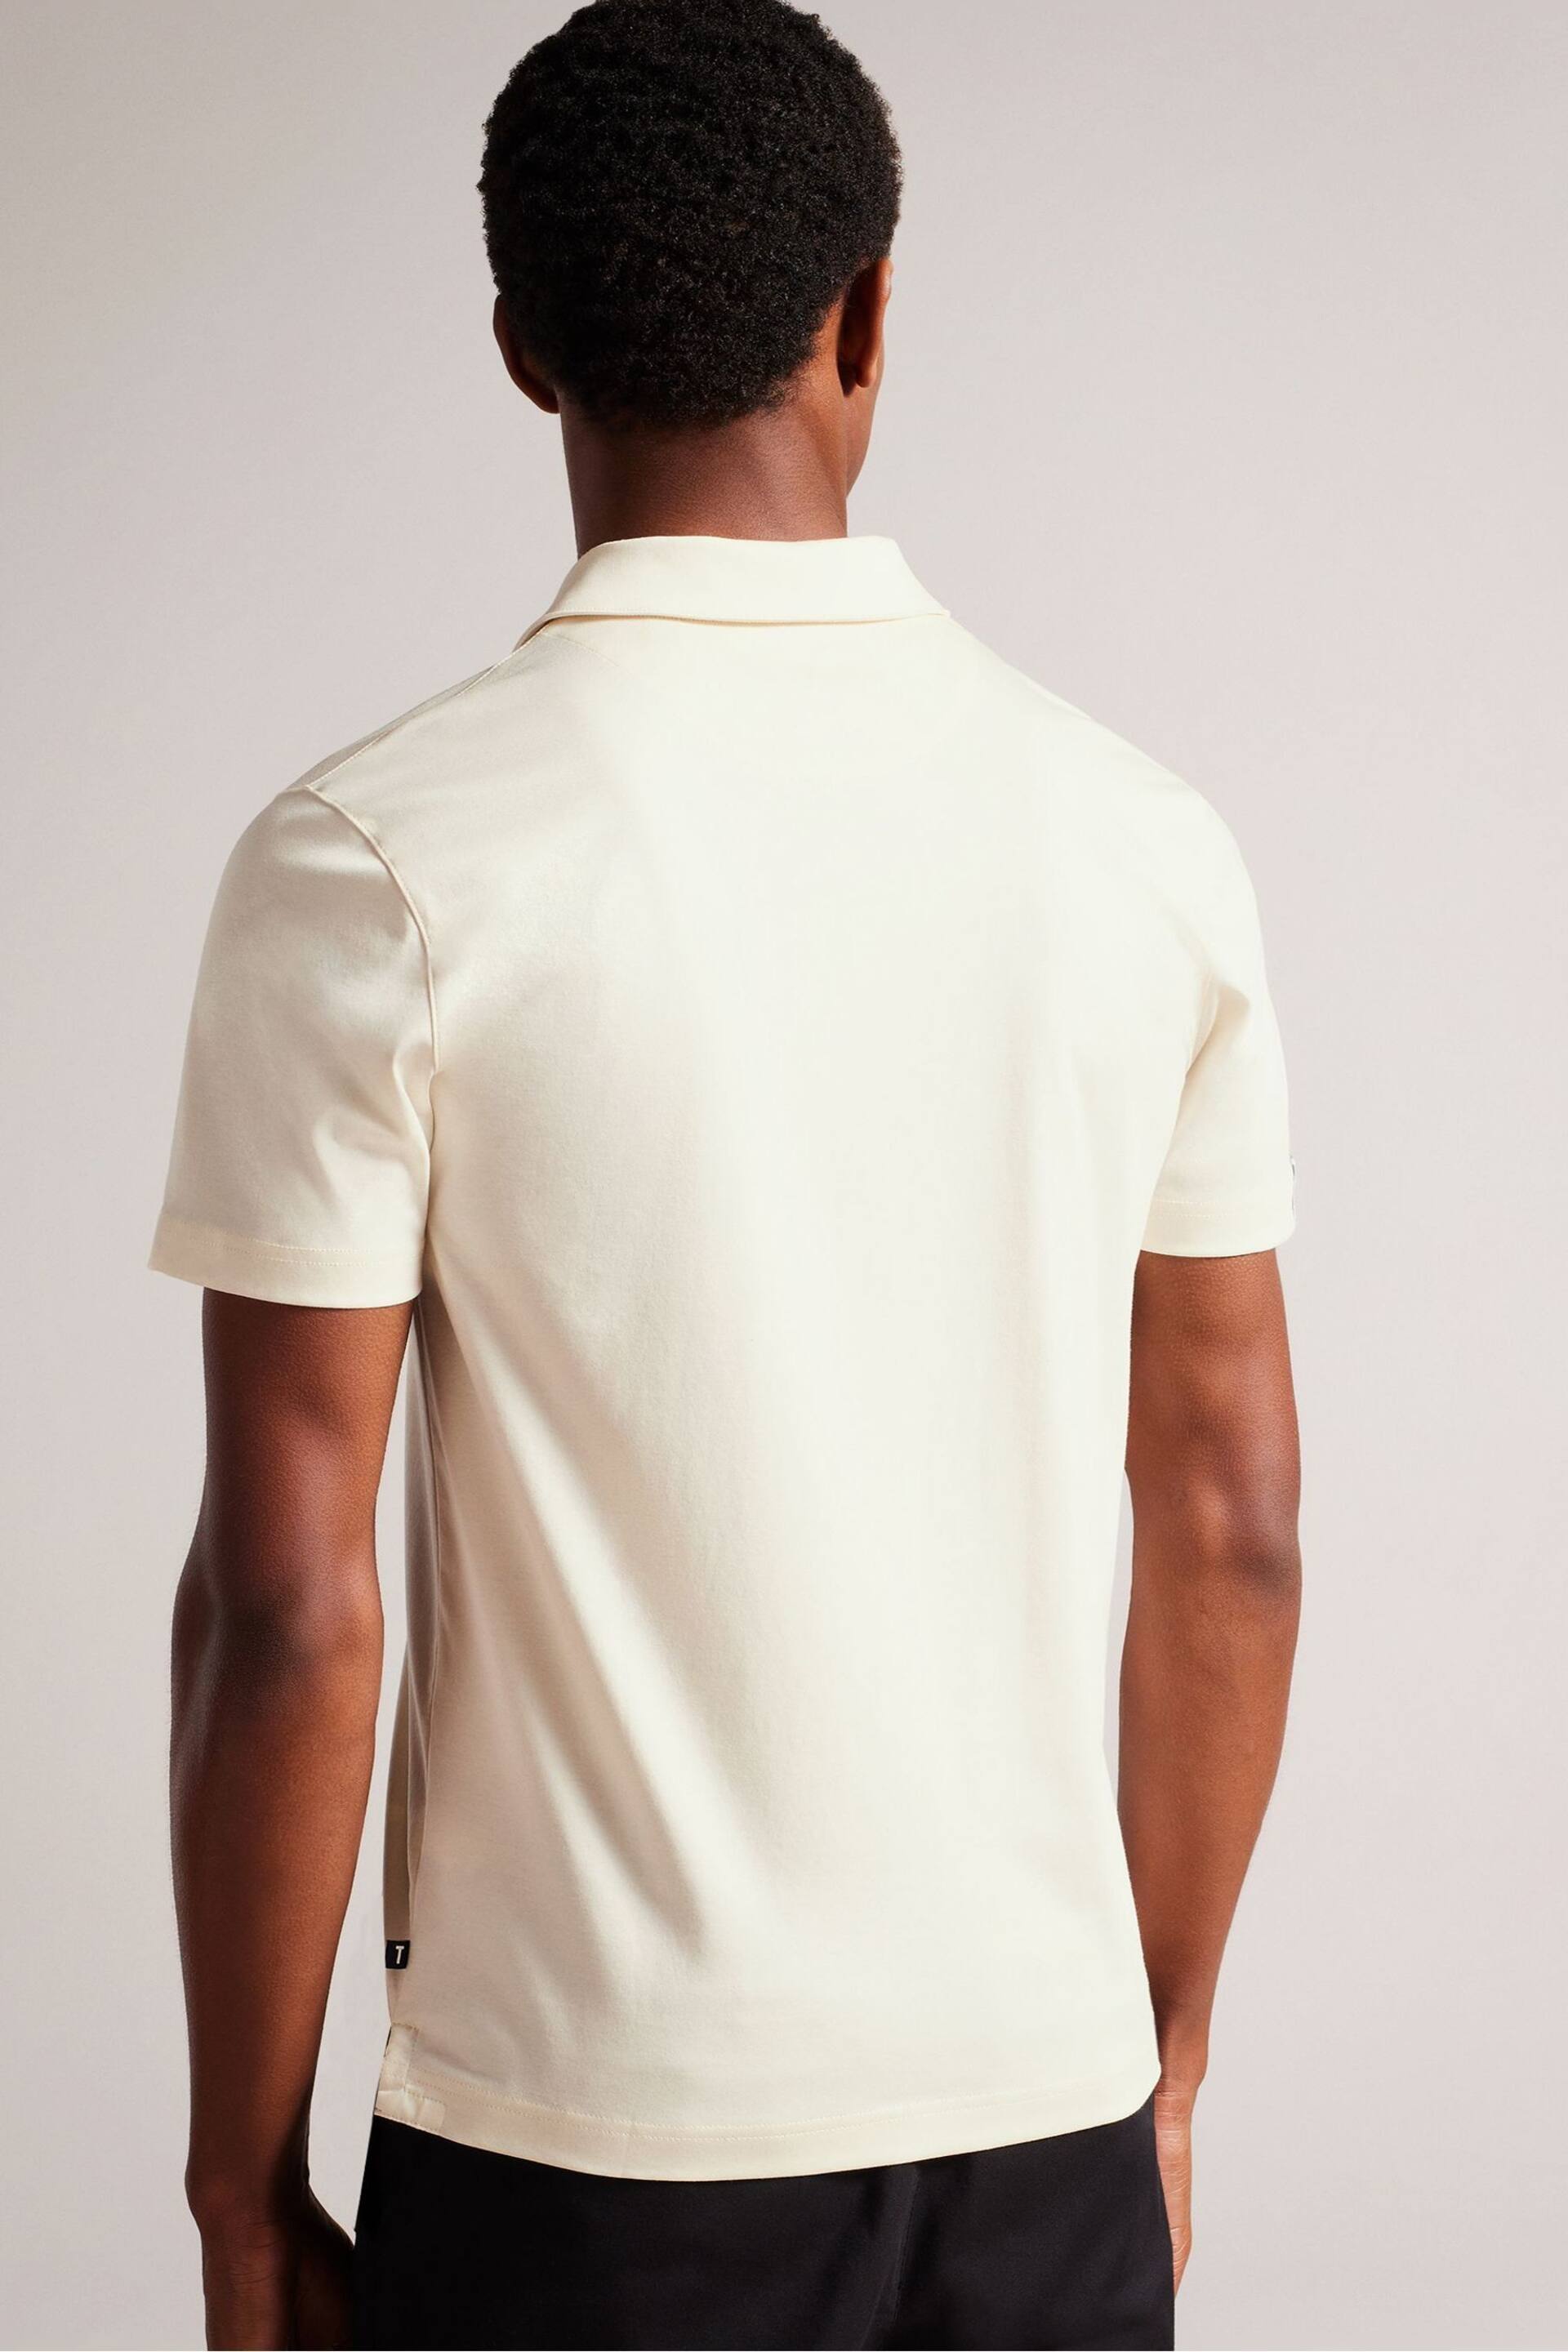 Ted Baker White Slim Zeiter Soft Touch Polo Shirt - Image 2 of 5